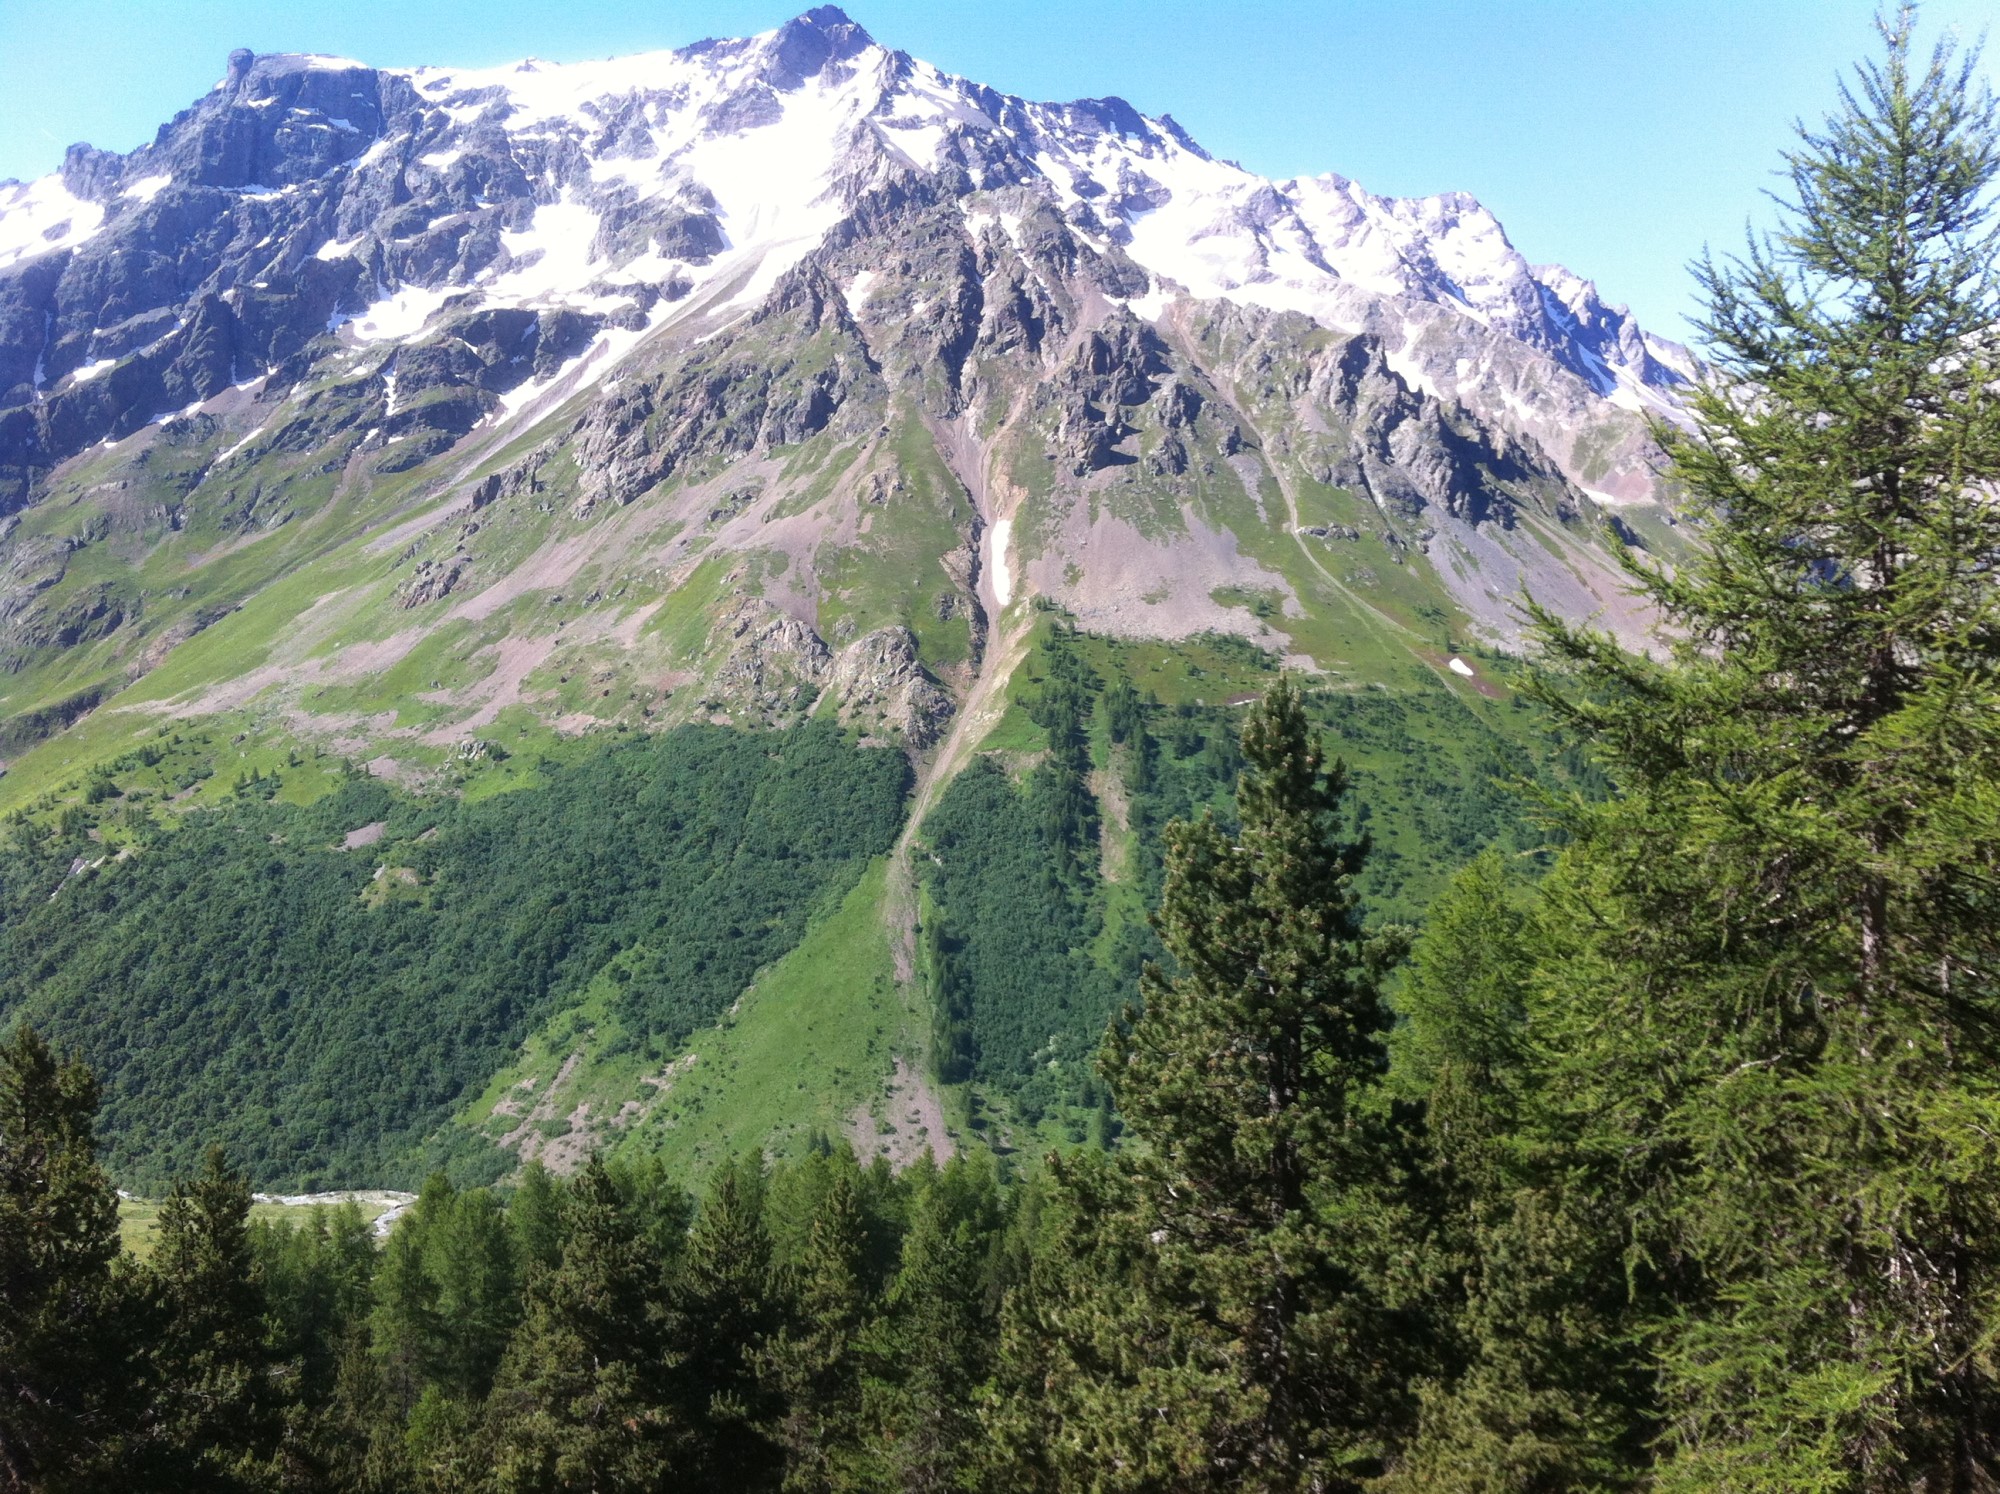 View of a treeline near Lautaret, French Alps